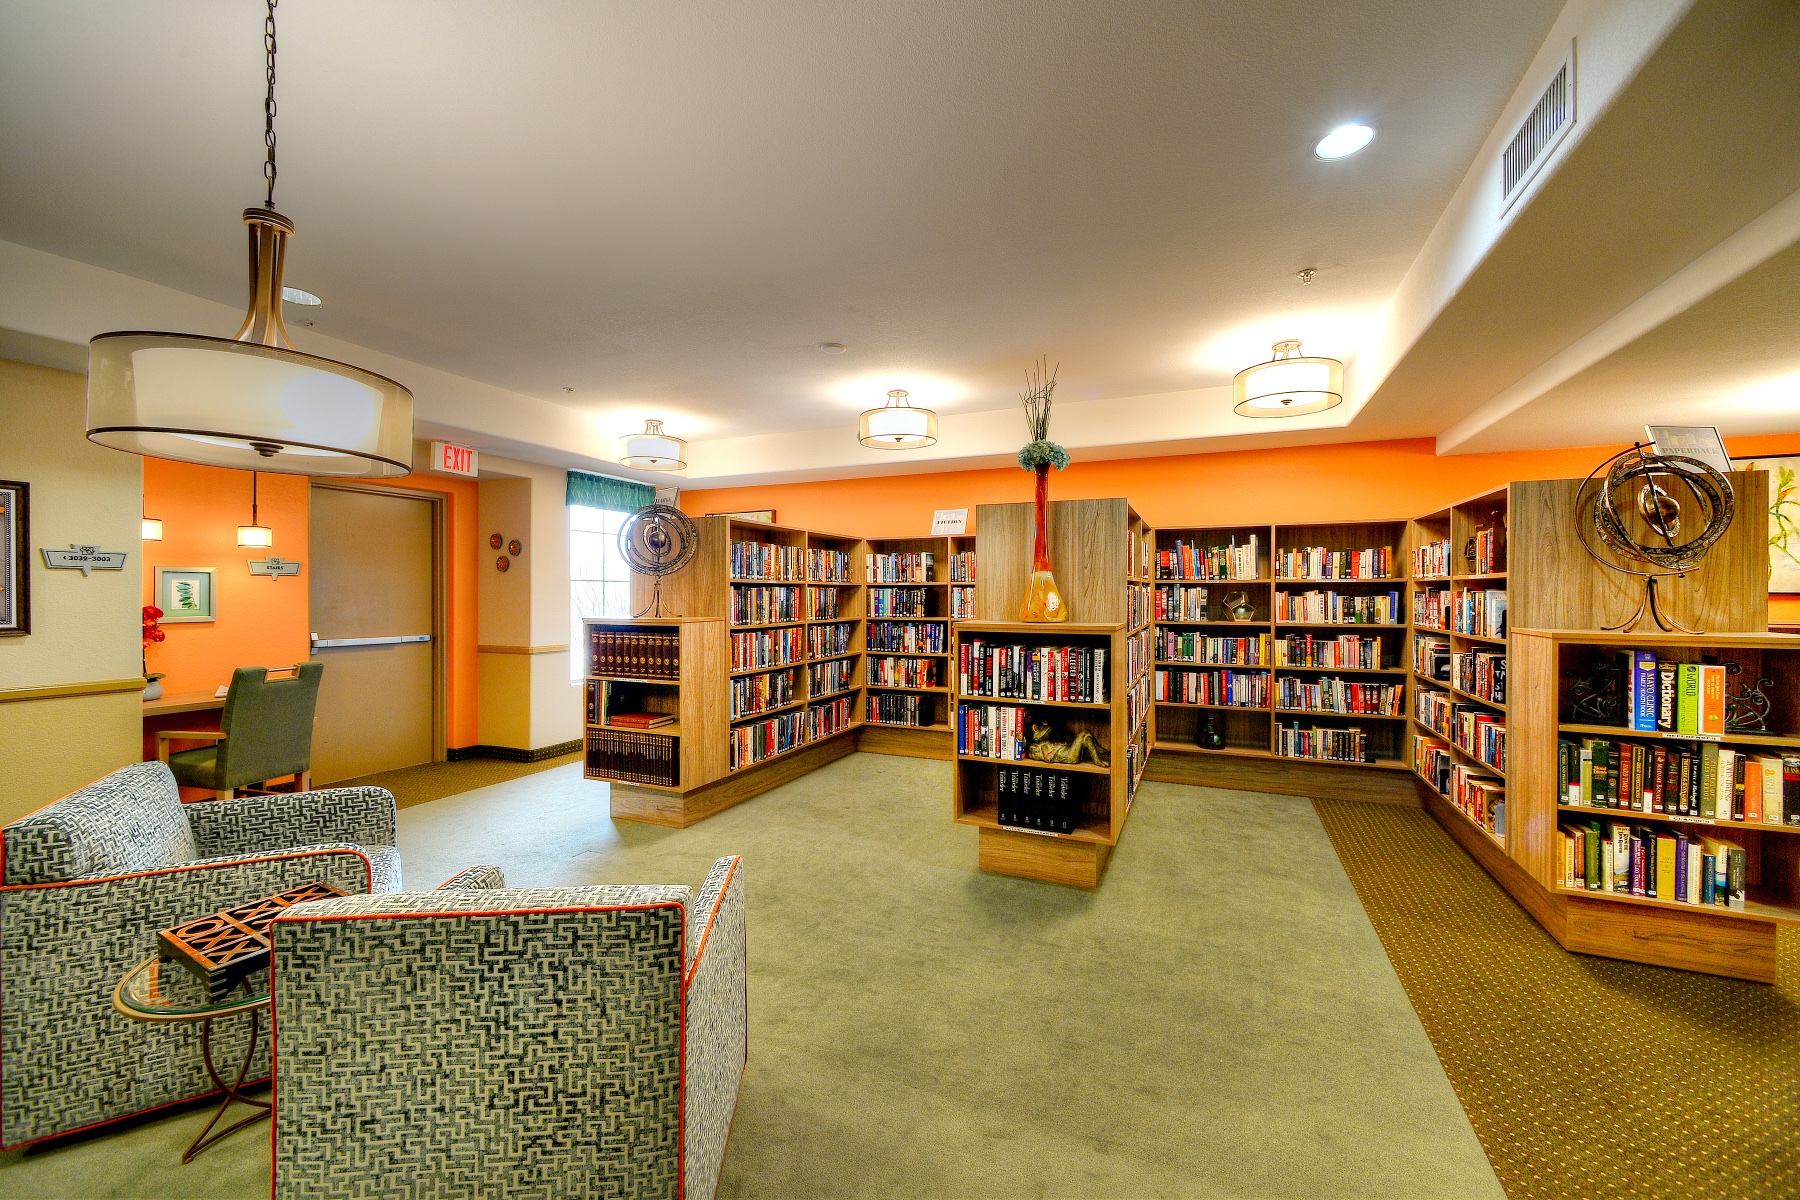 Community libraries help residents transition to senior living communities by allowing residents to keep and share their favorite books.